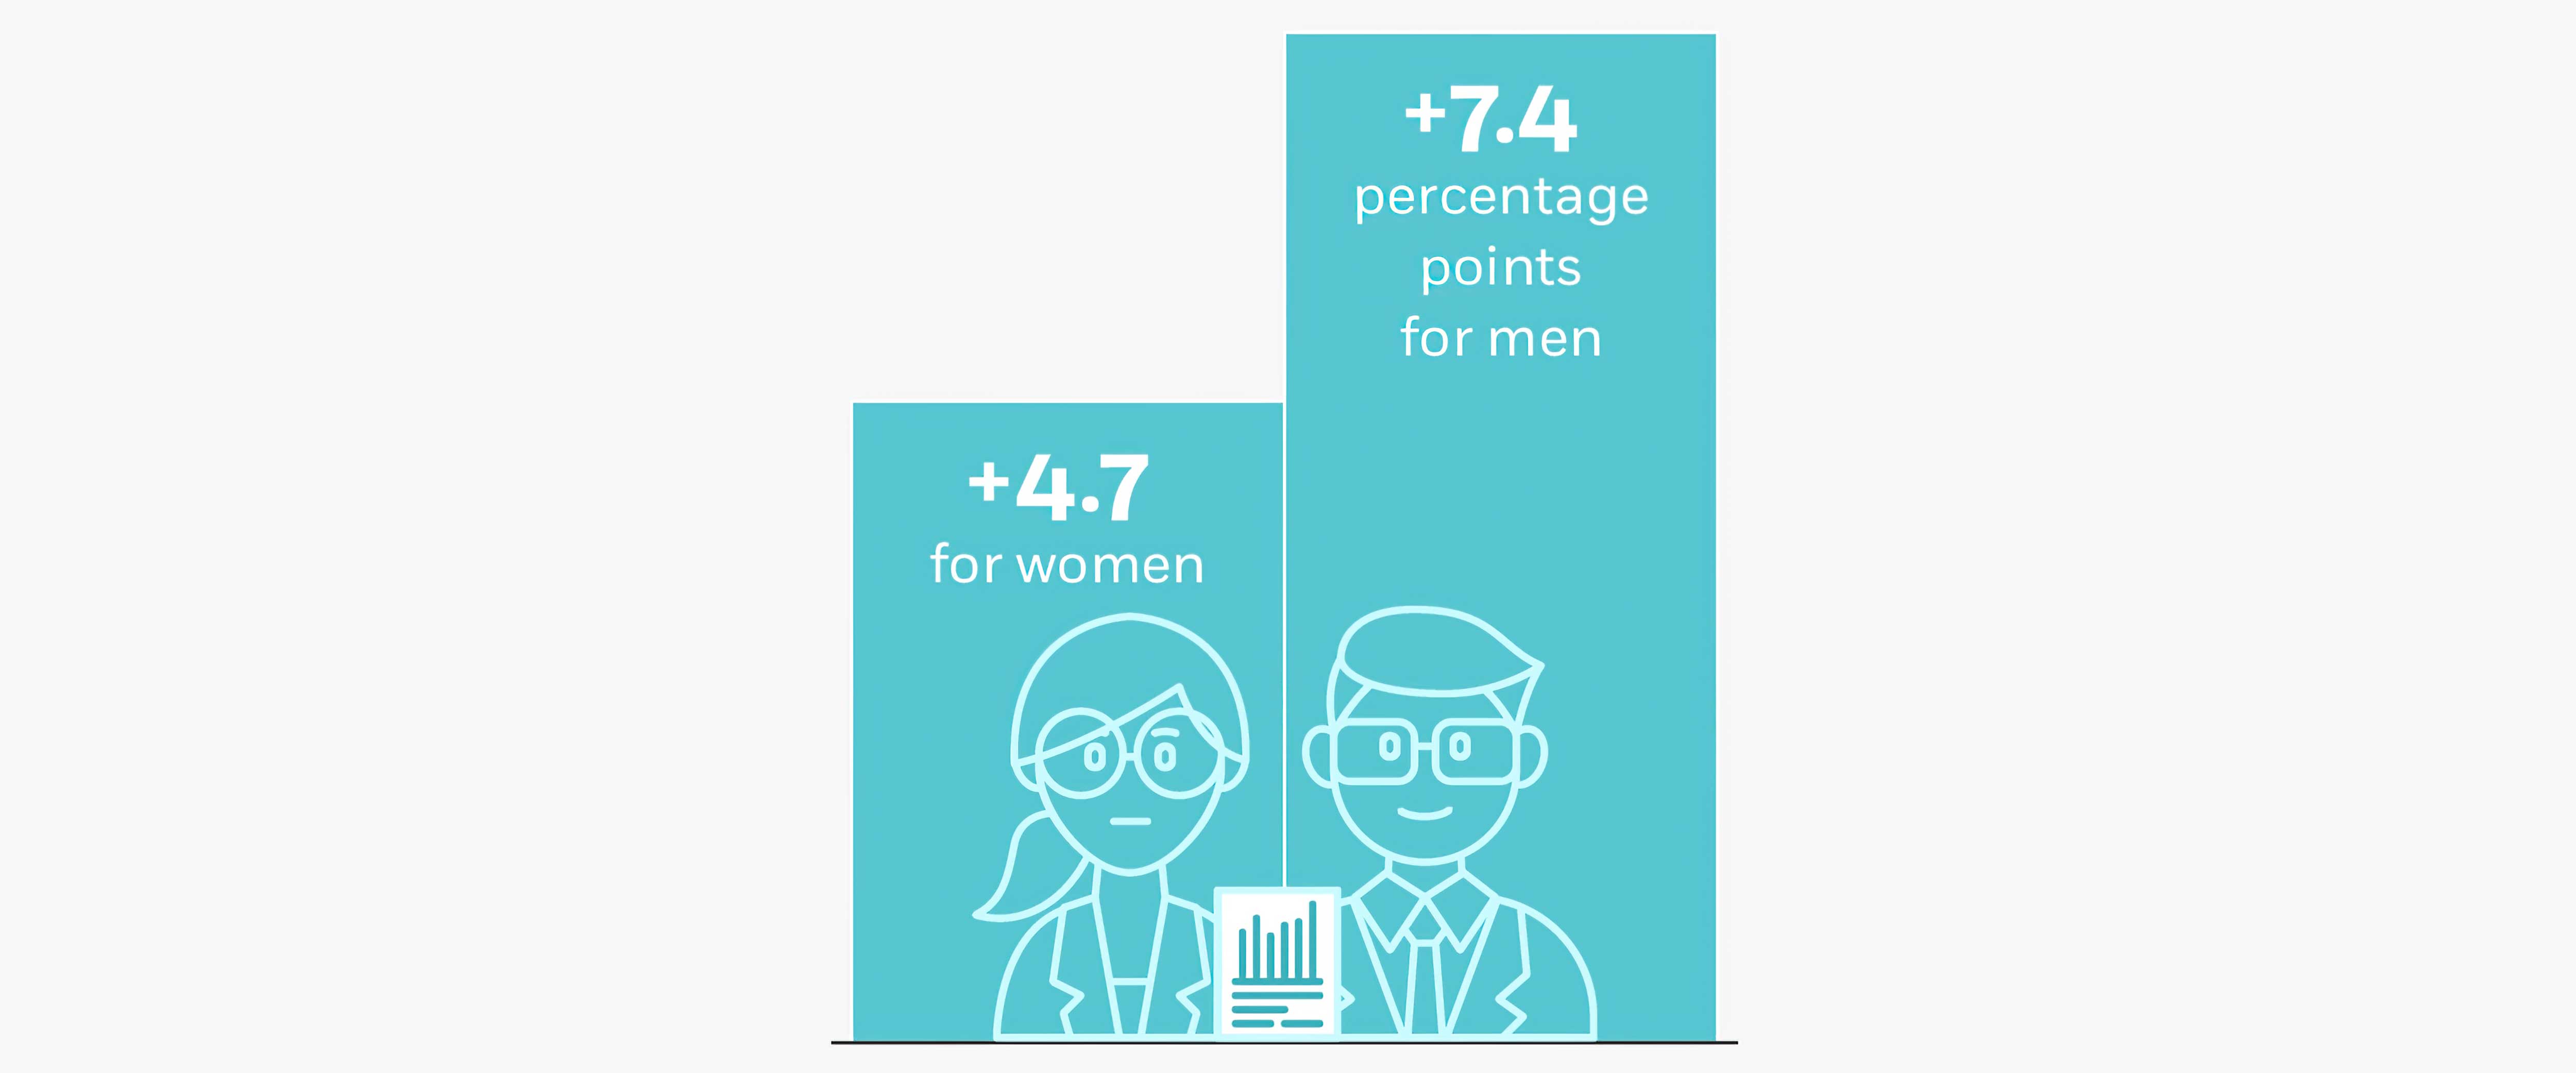 Bar chart with a man and woman showing tenure rates